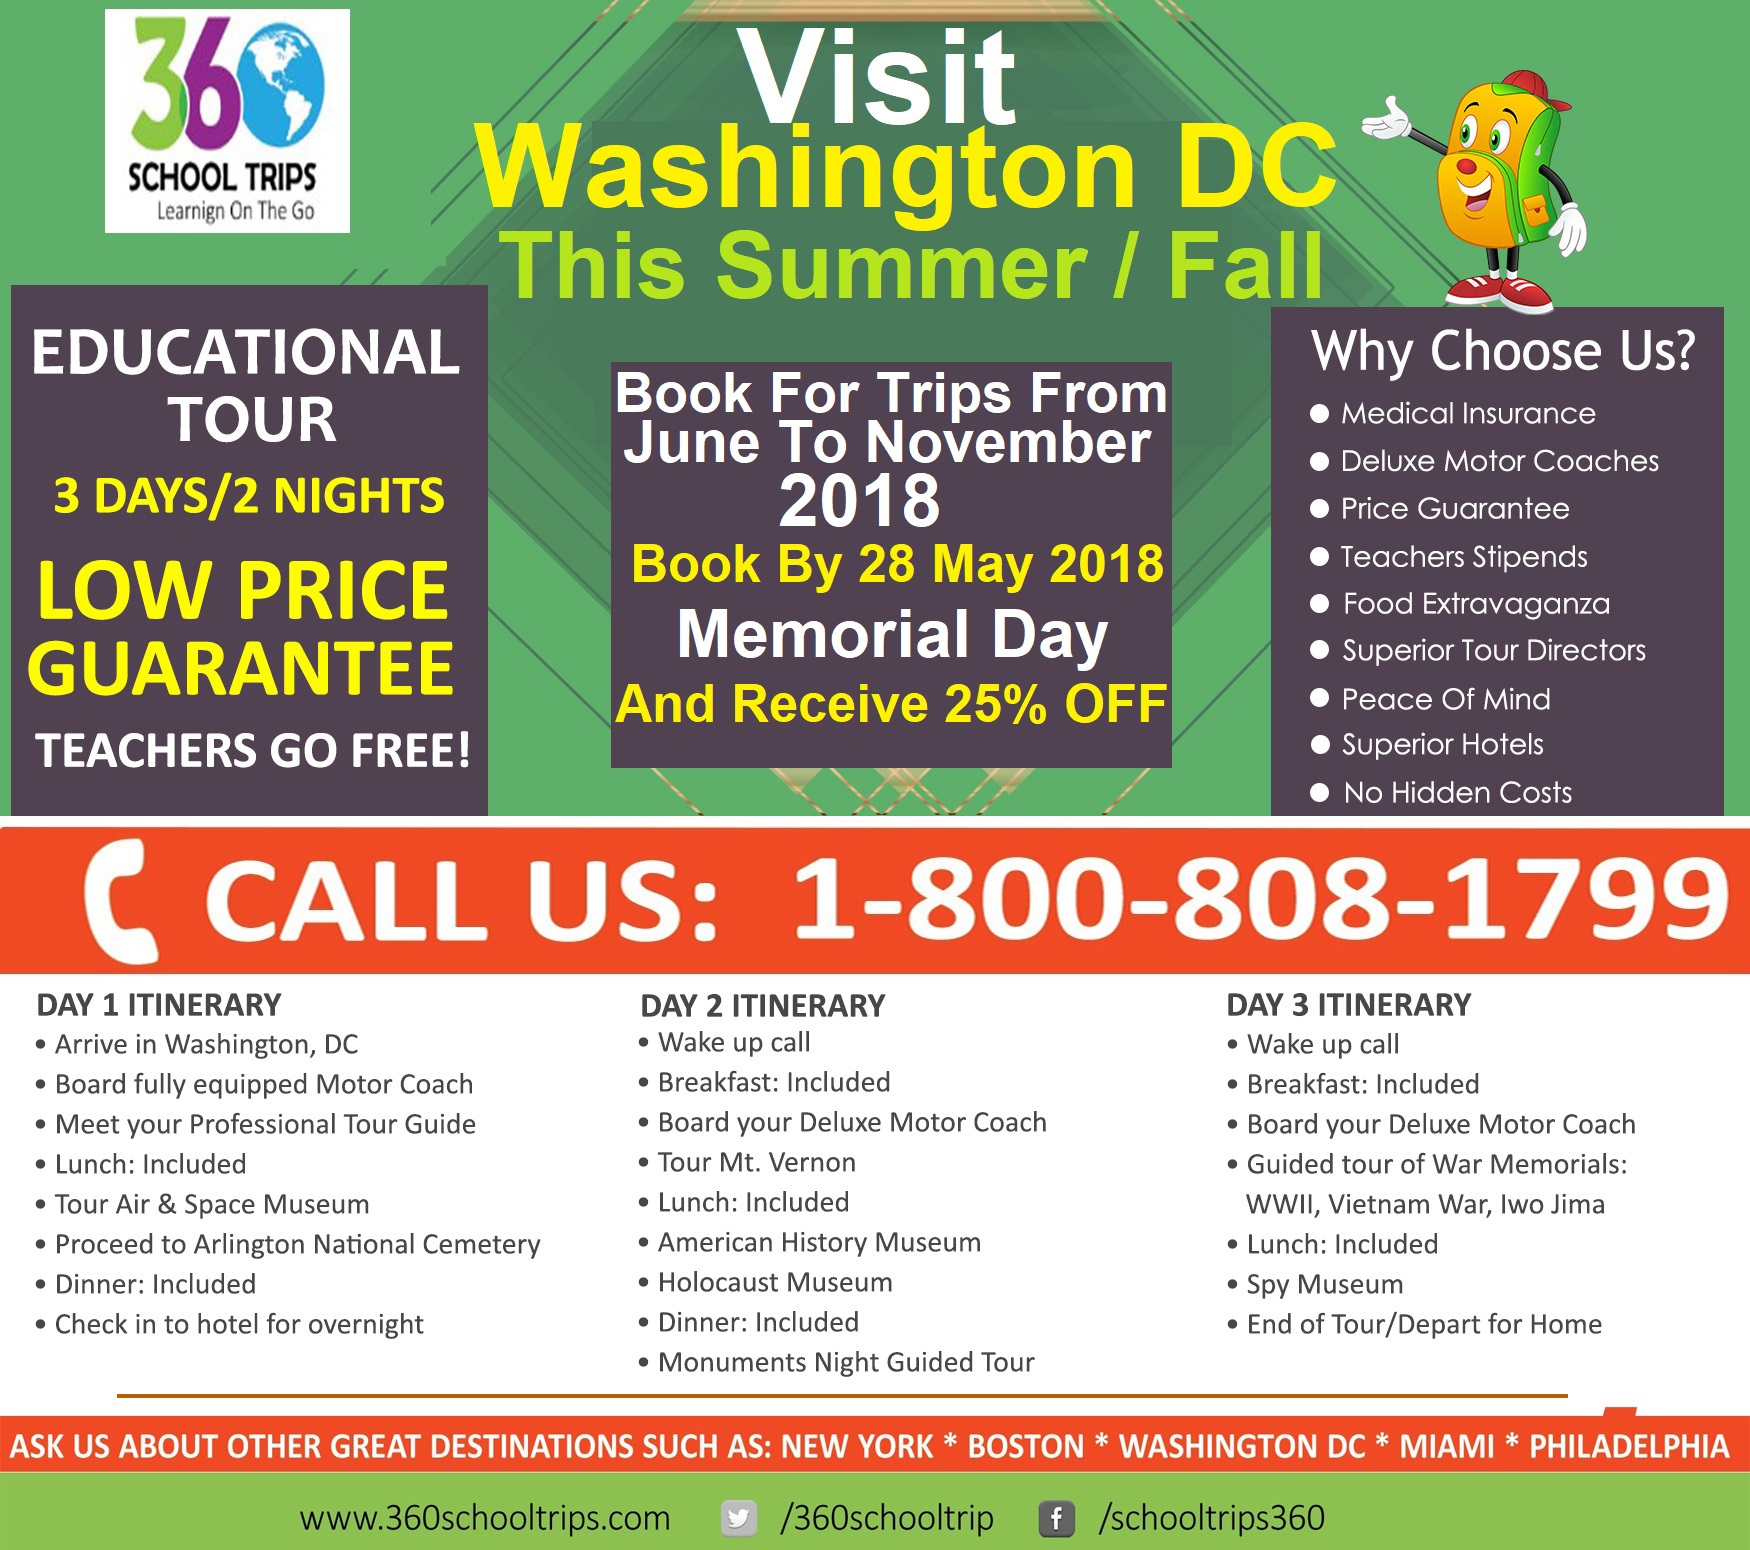 Visit Washington DC this Summer / Fall  Book for trips from June to November 2018. Book By 28 May 2018 (Memorial Day And Receive 25% OFF) Please call 1800-808-1799. Ext 305 Or Send us an inquiry on our website. https://360schooltrips.com/contact-us Or You can also email us at Carl@360schooltrips.com